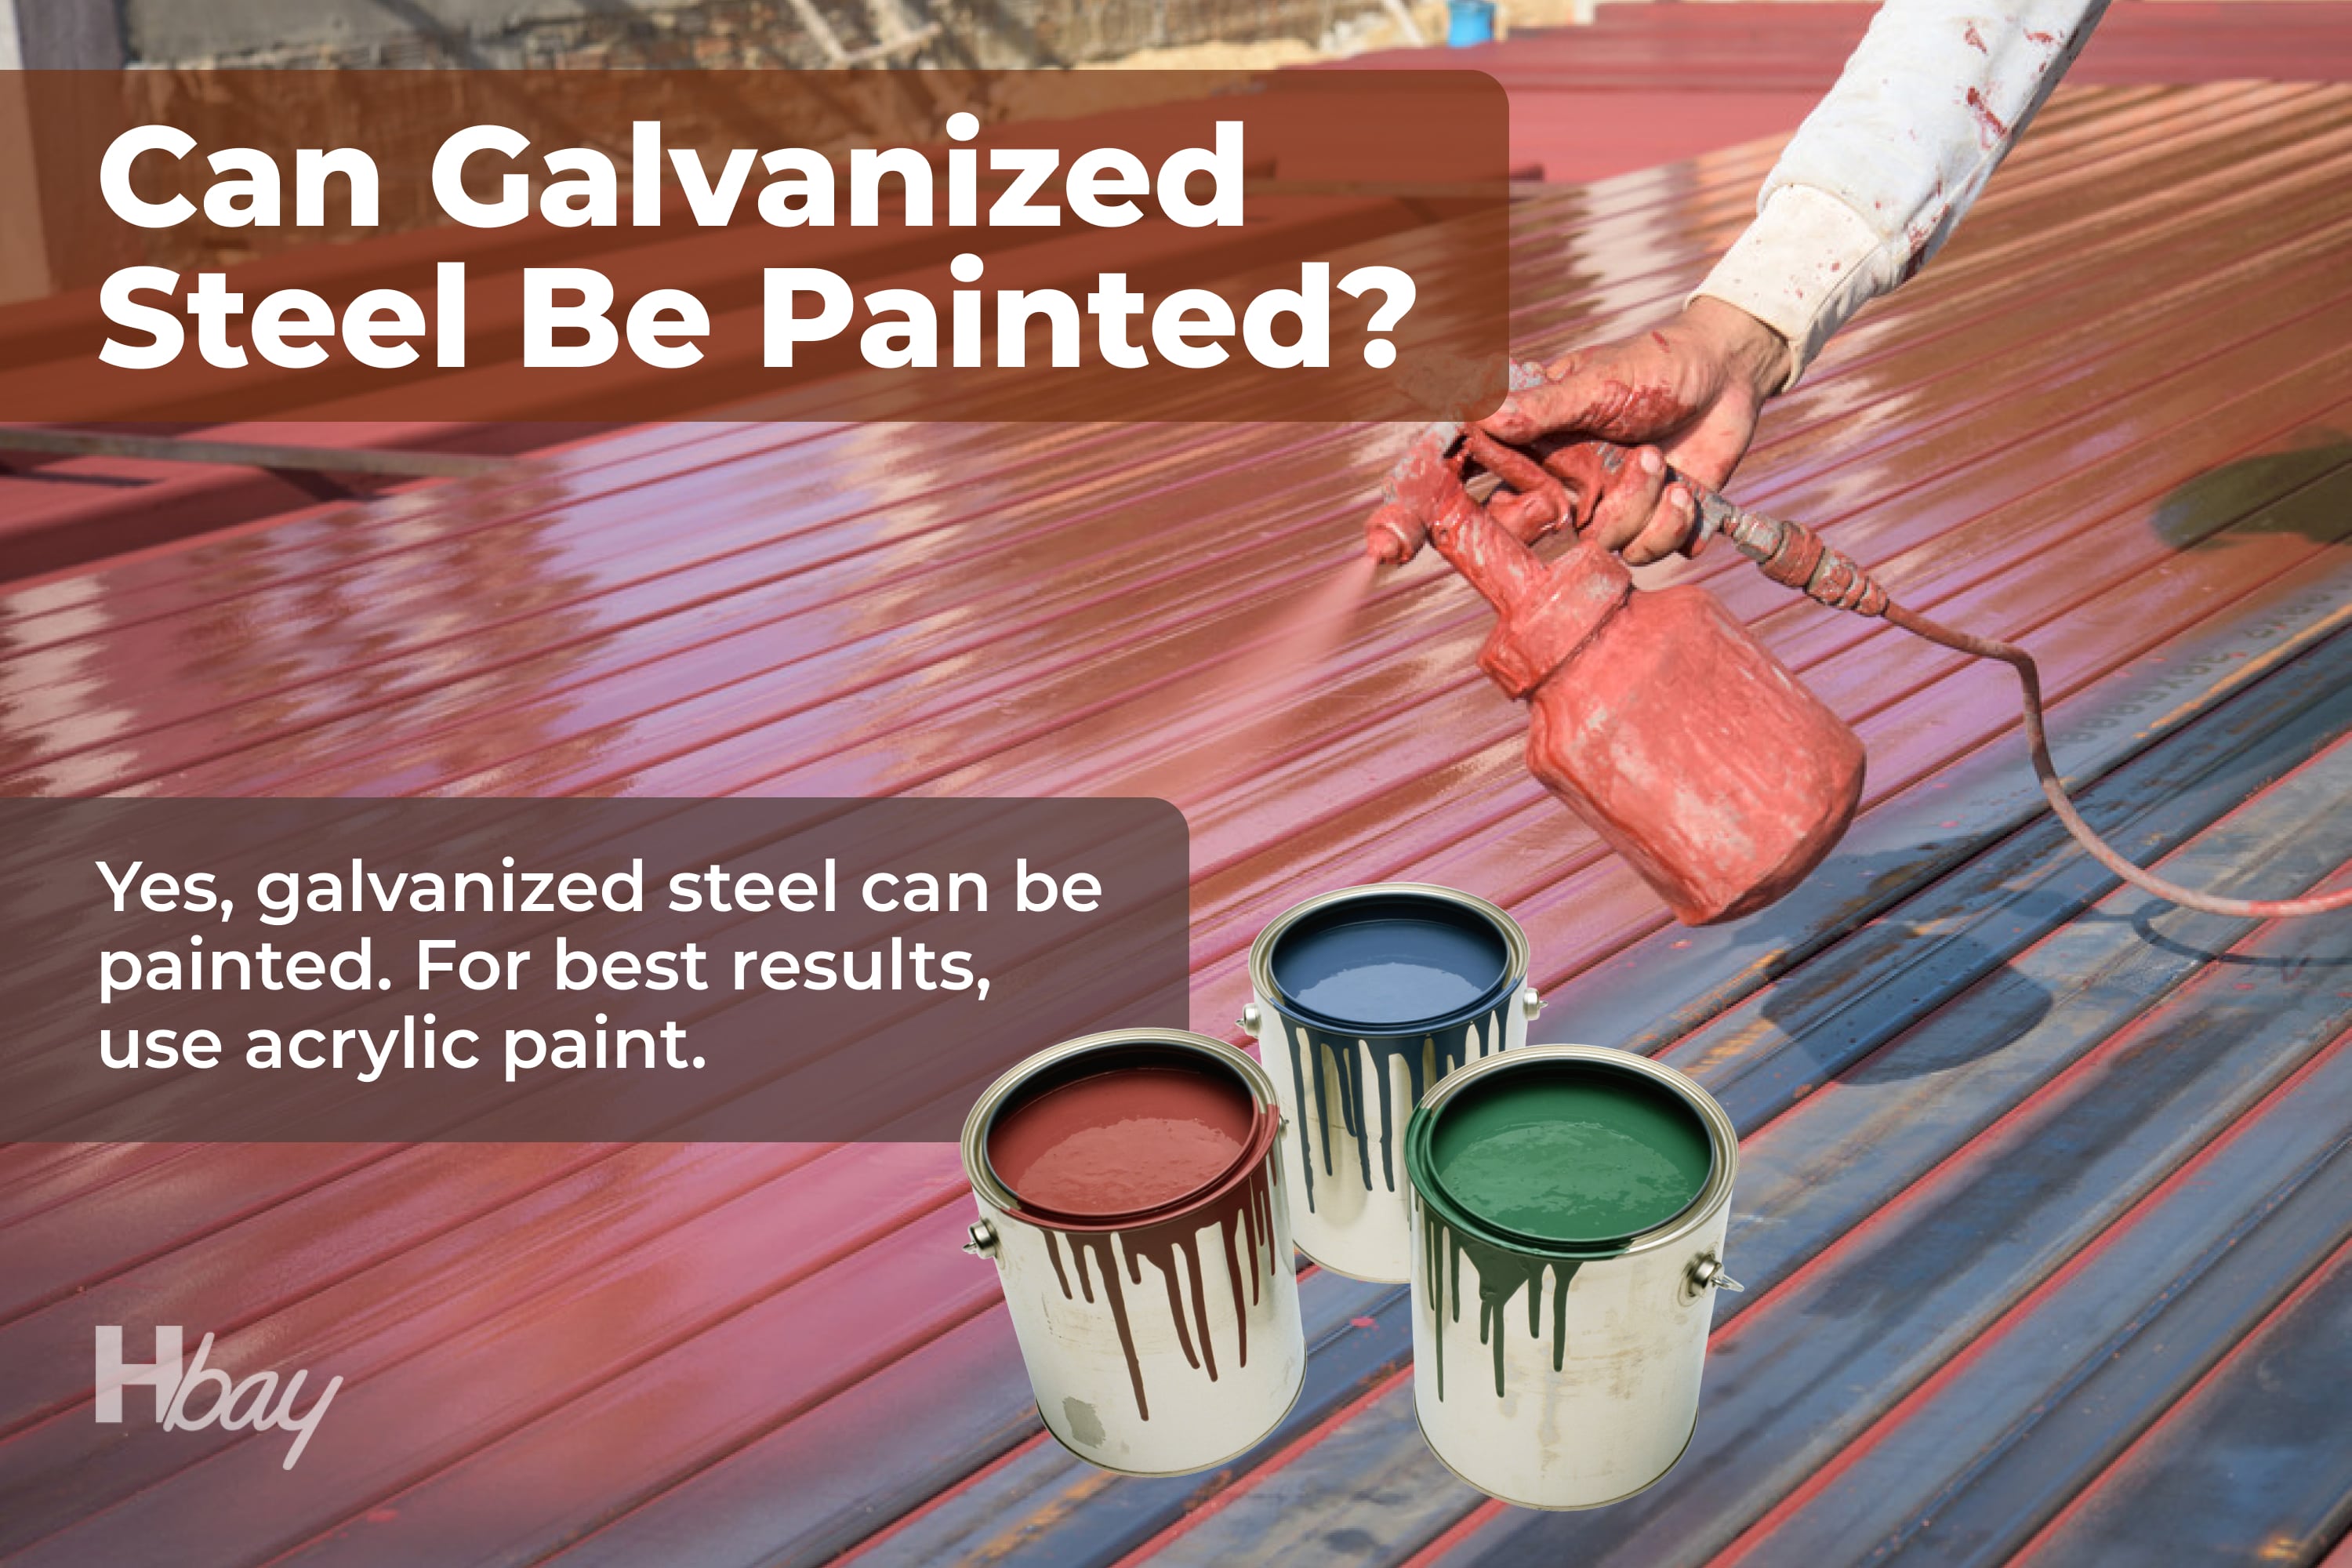 Can galvanized steel be painted